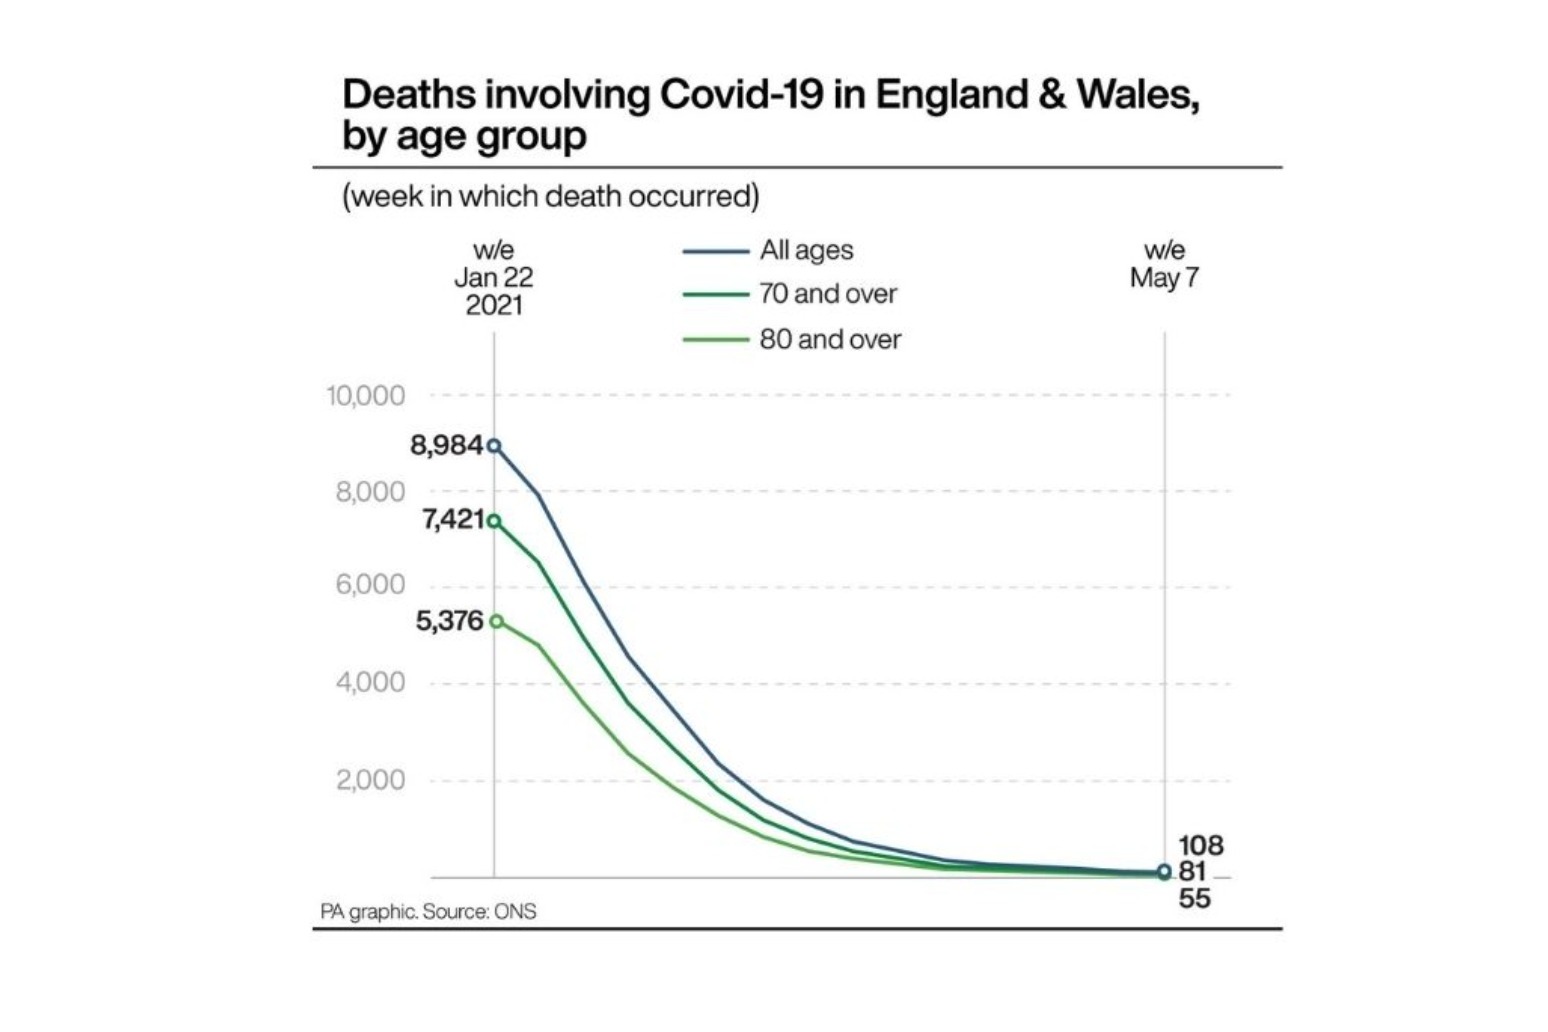 Covid-19 deaths rise slightly as bank holiday slows registrations 